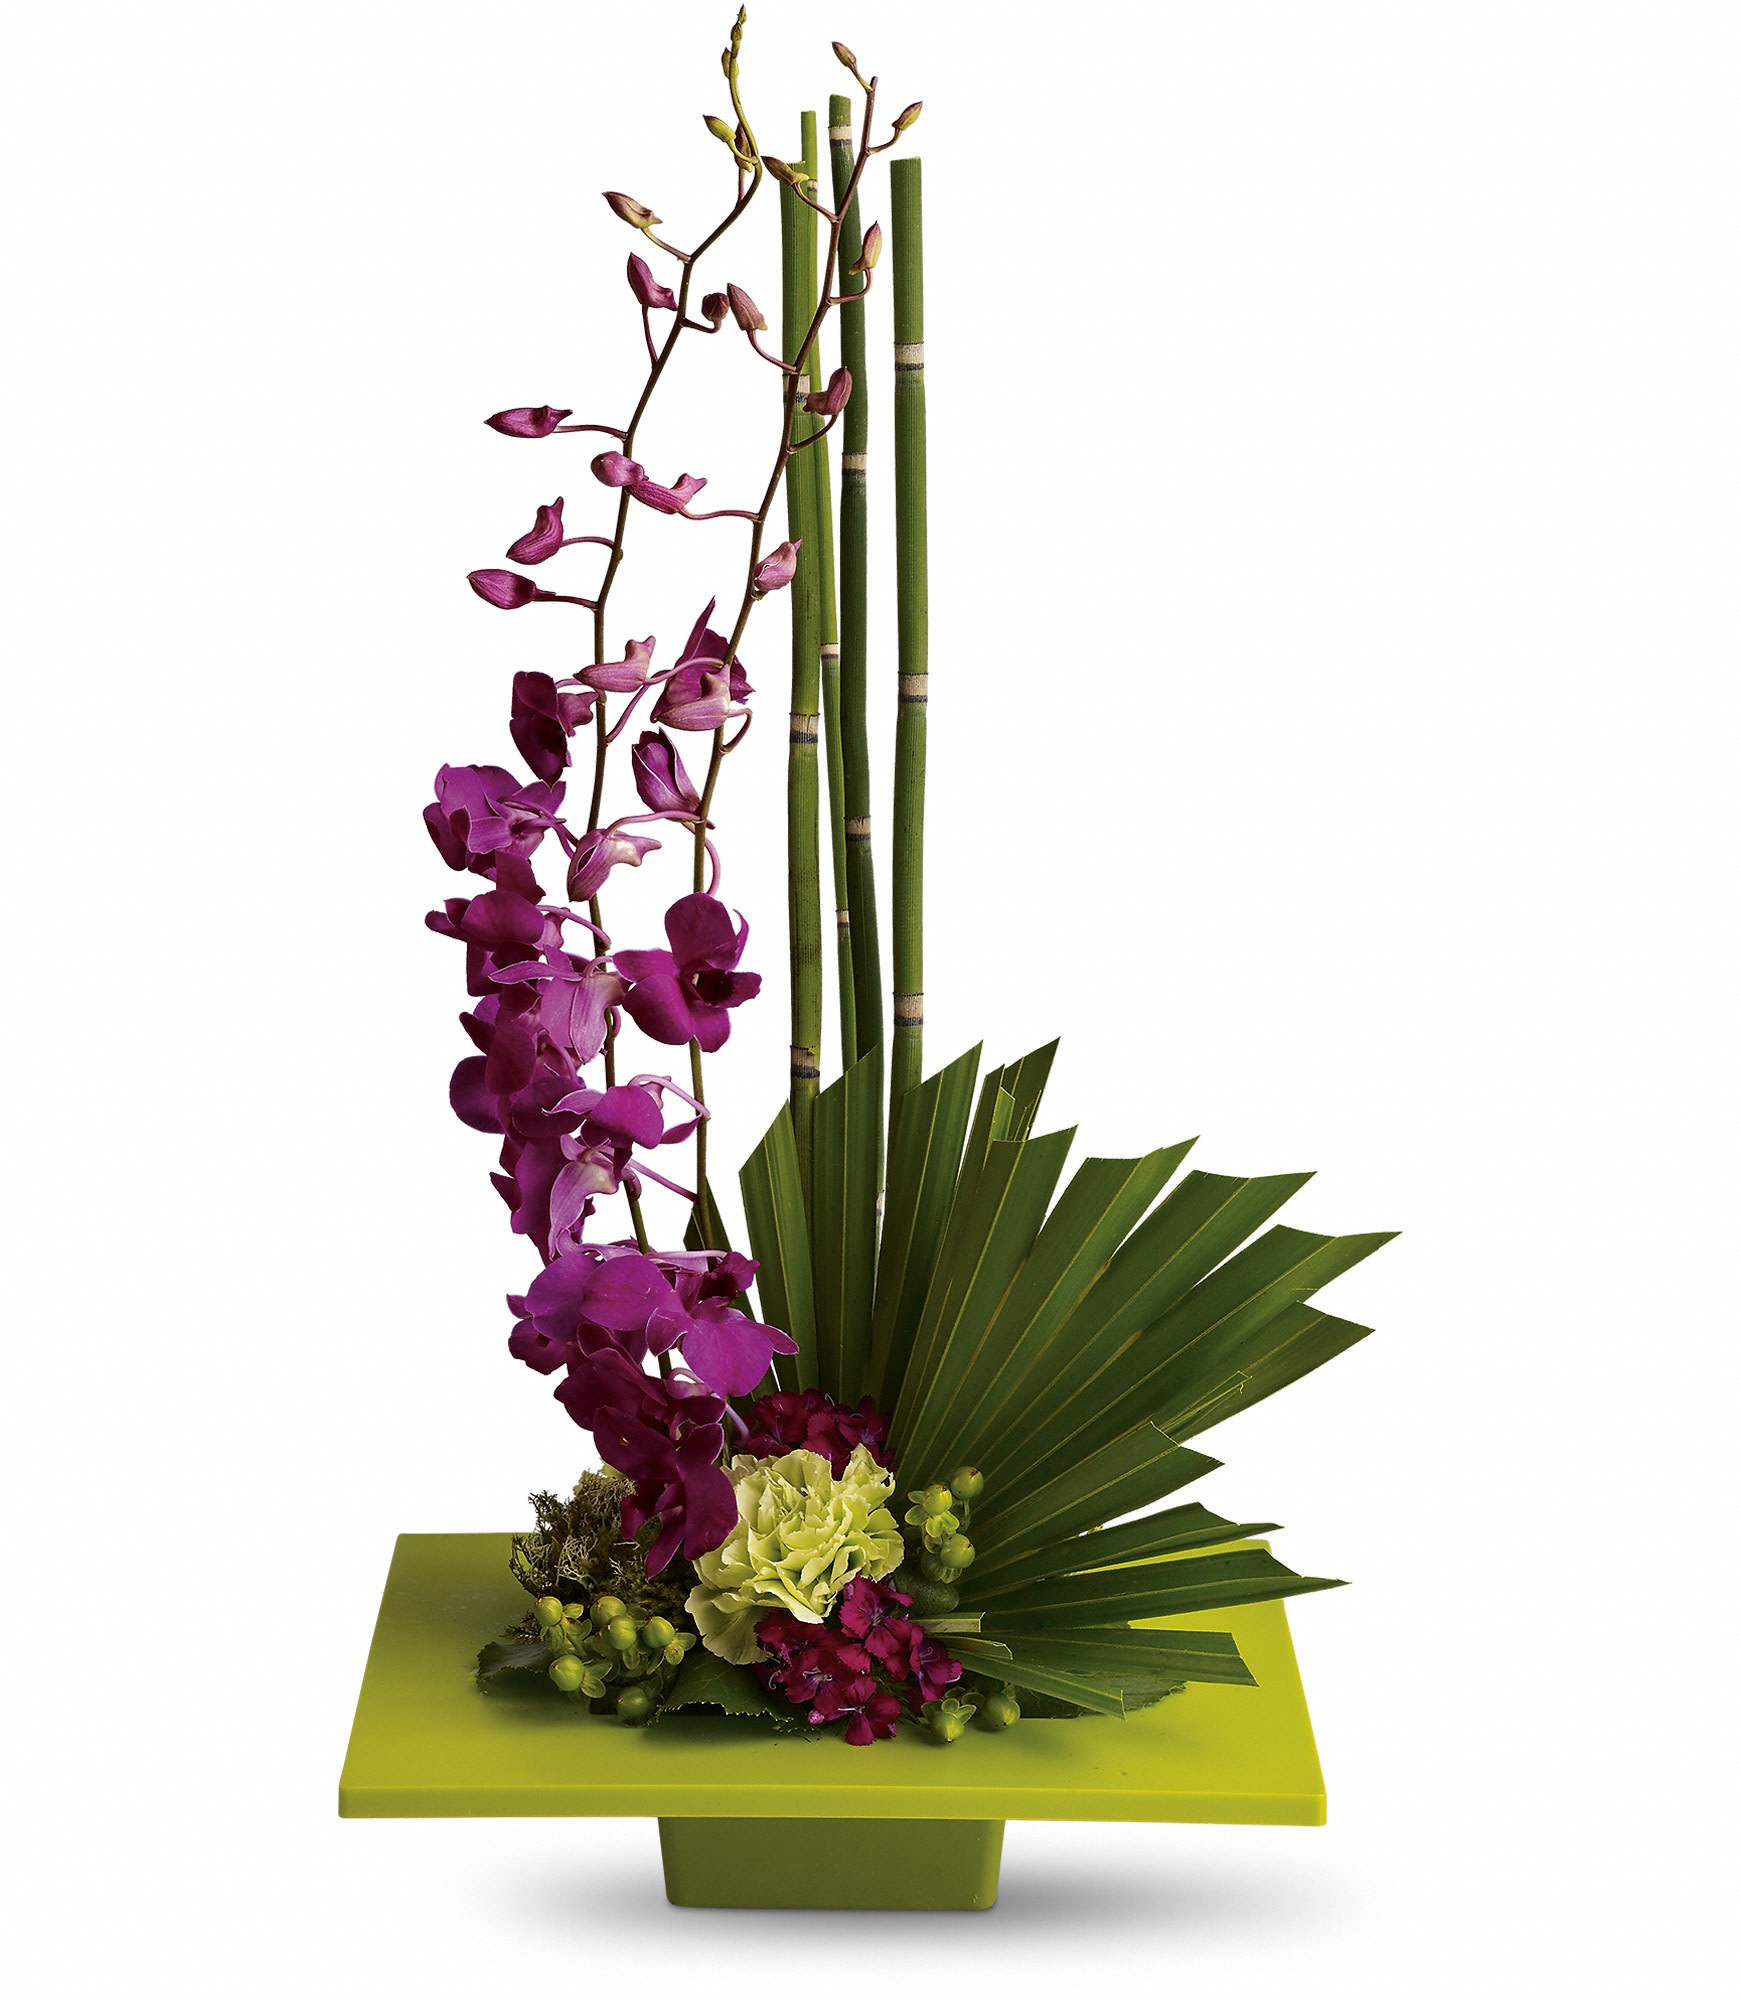 Zen Artistry - It's artistic arrangements like this one that make flowers such an integral and beautiful ingredient in feng shui. A brilliant green container and exotic palm leaf provide the perfect backdrop for purple orchids and a mix of delightful tropical flowers. This gift takes artistry to new heights. T81-1A